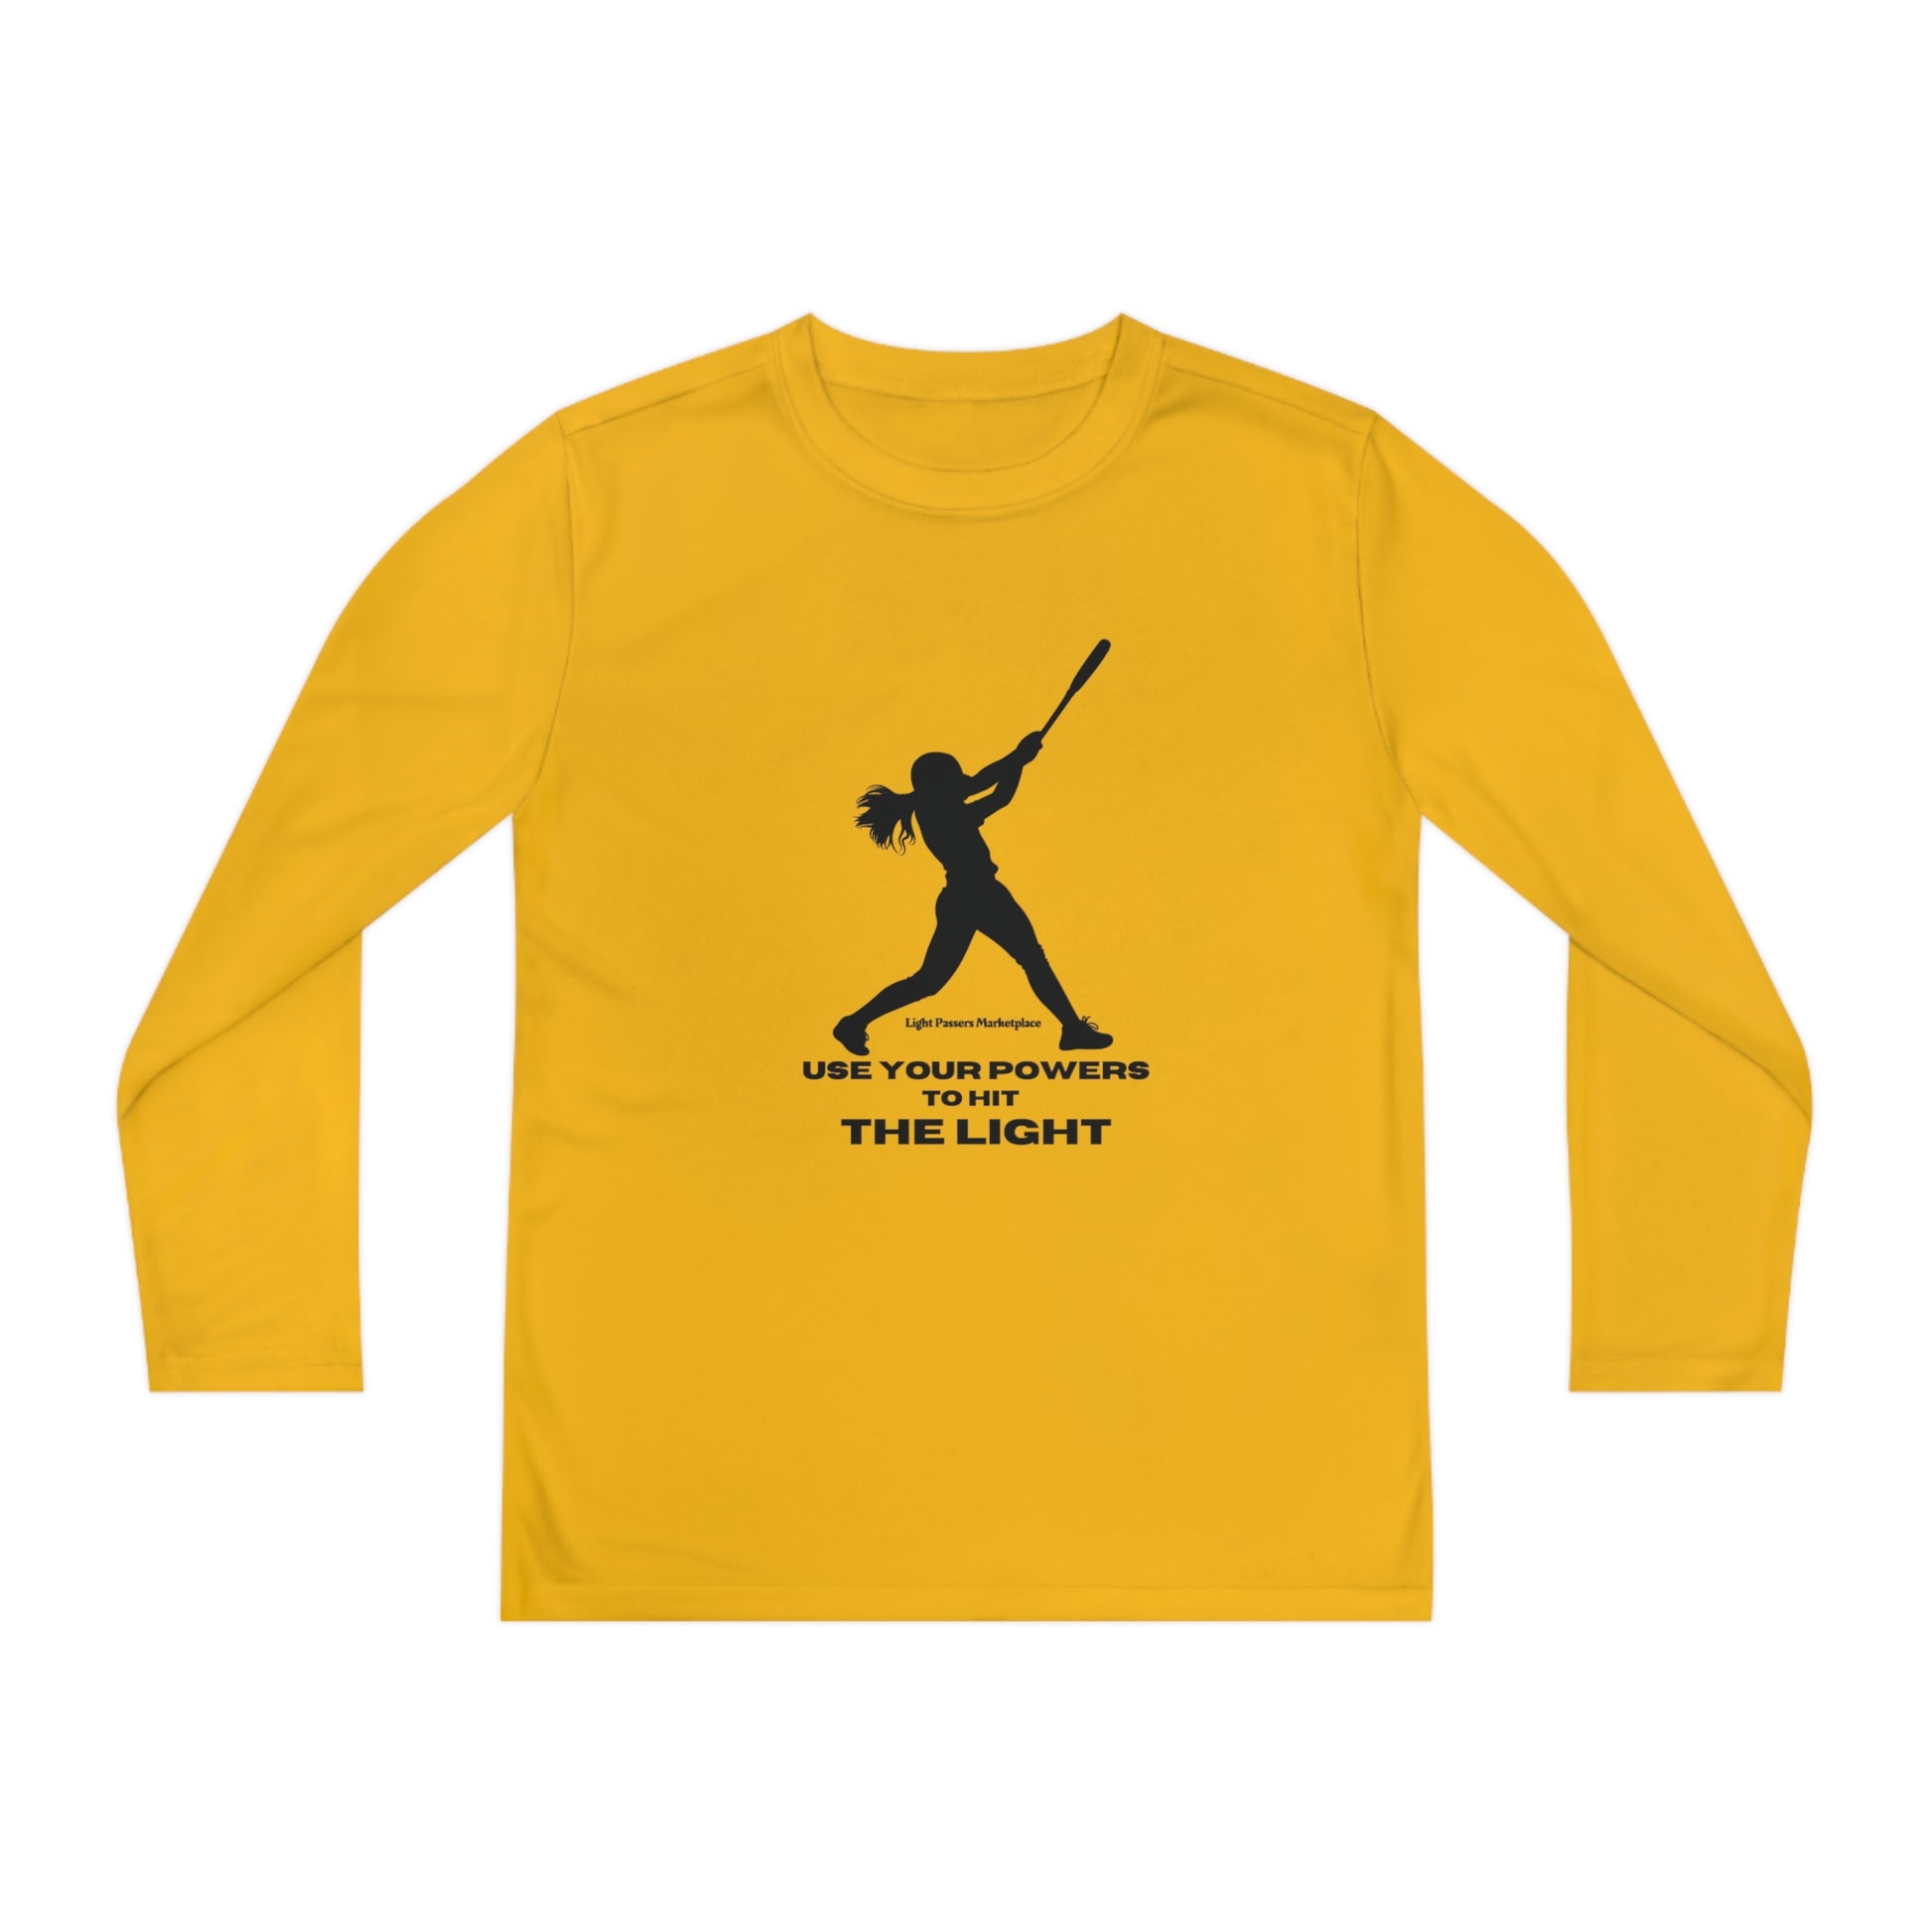 Youth long sleeve active shirt featuring a girl swinging a bat silhouette. Made of moisture-wicking polyester with an athletic fit and lightweight fabric. Ideal for active kids.